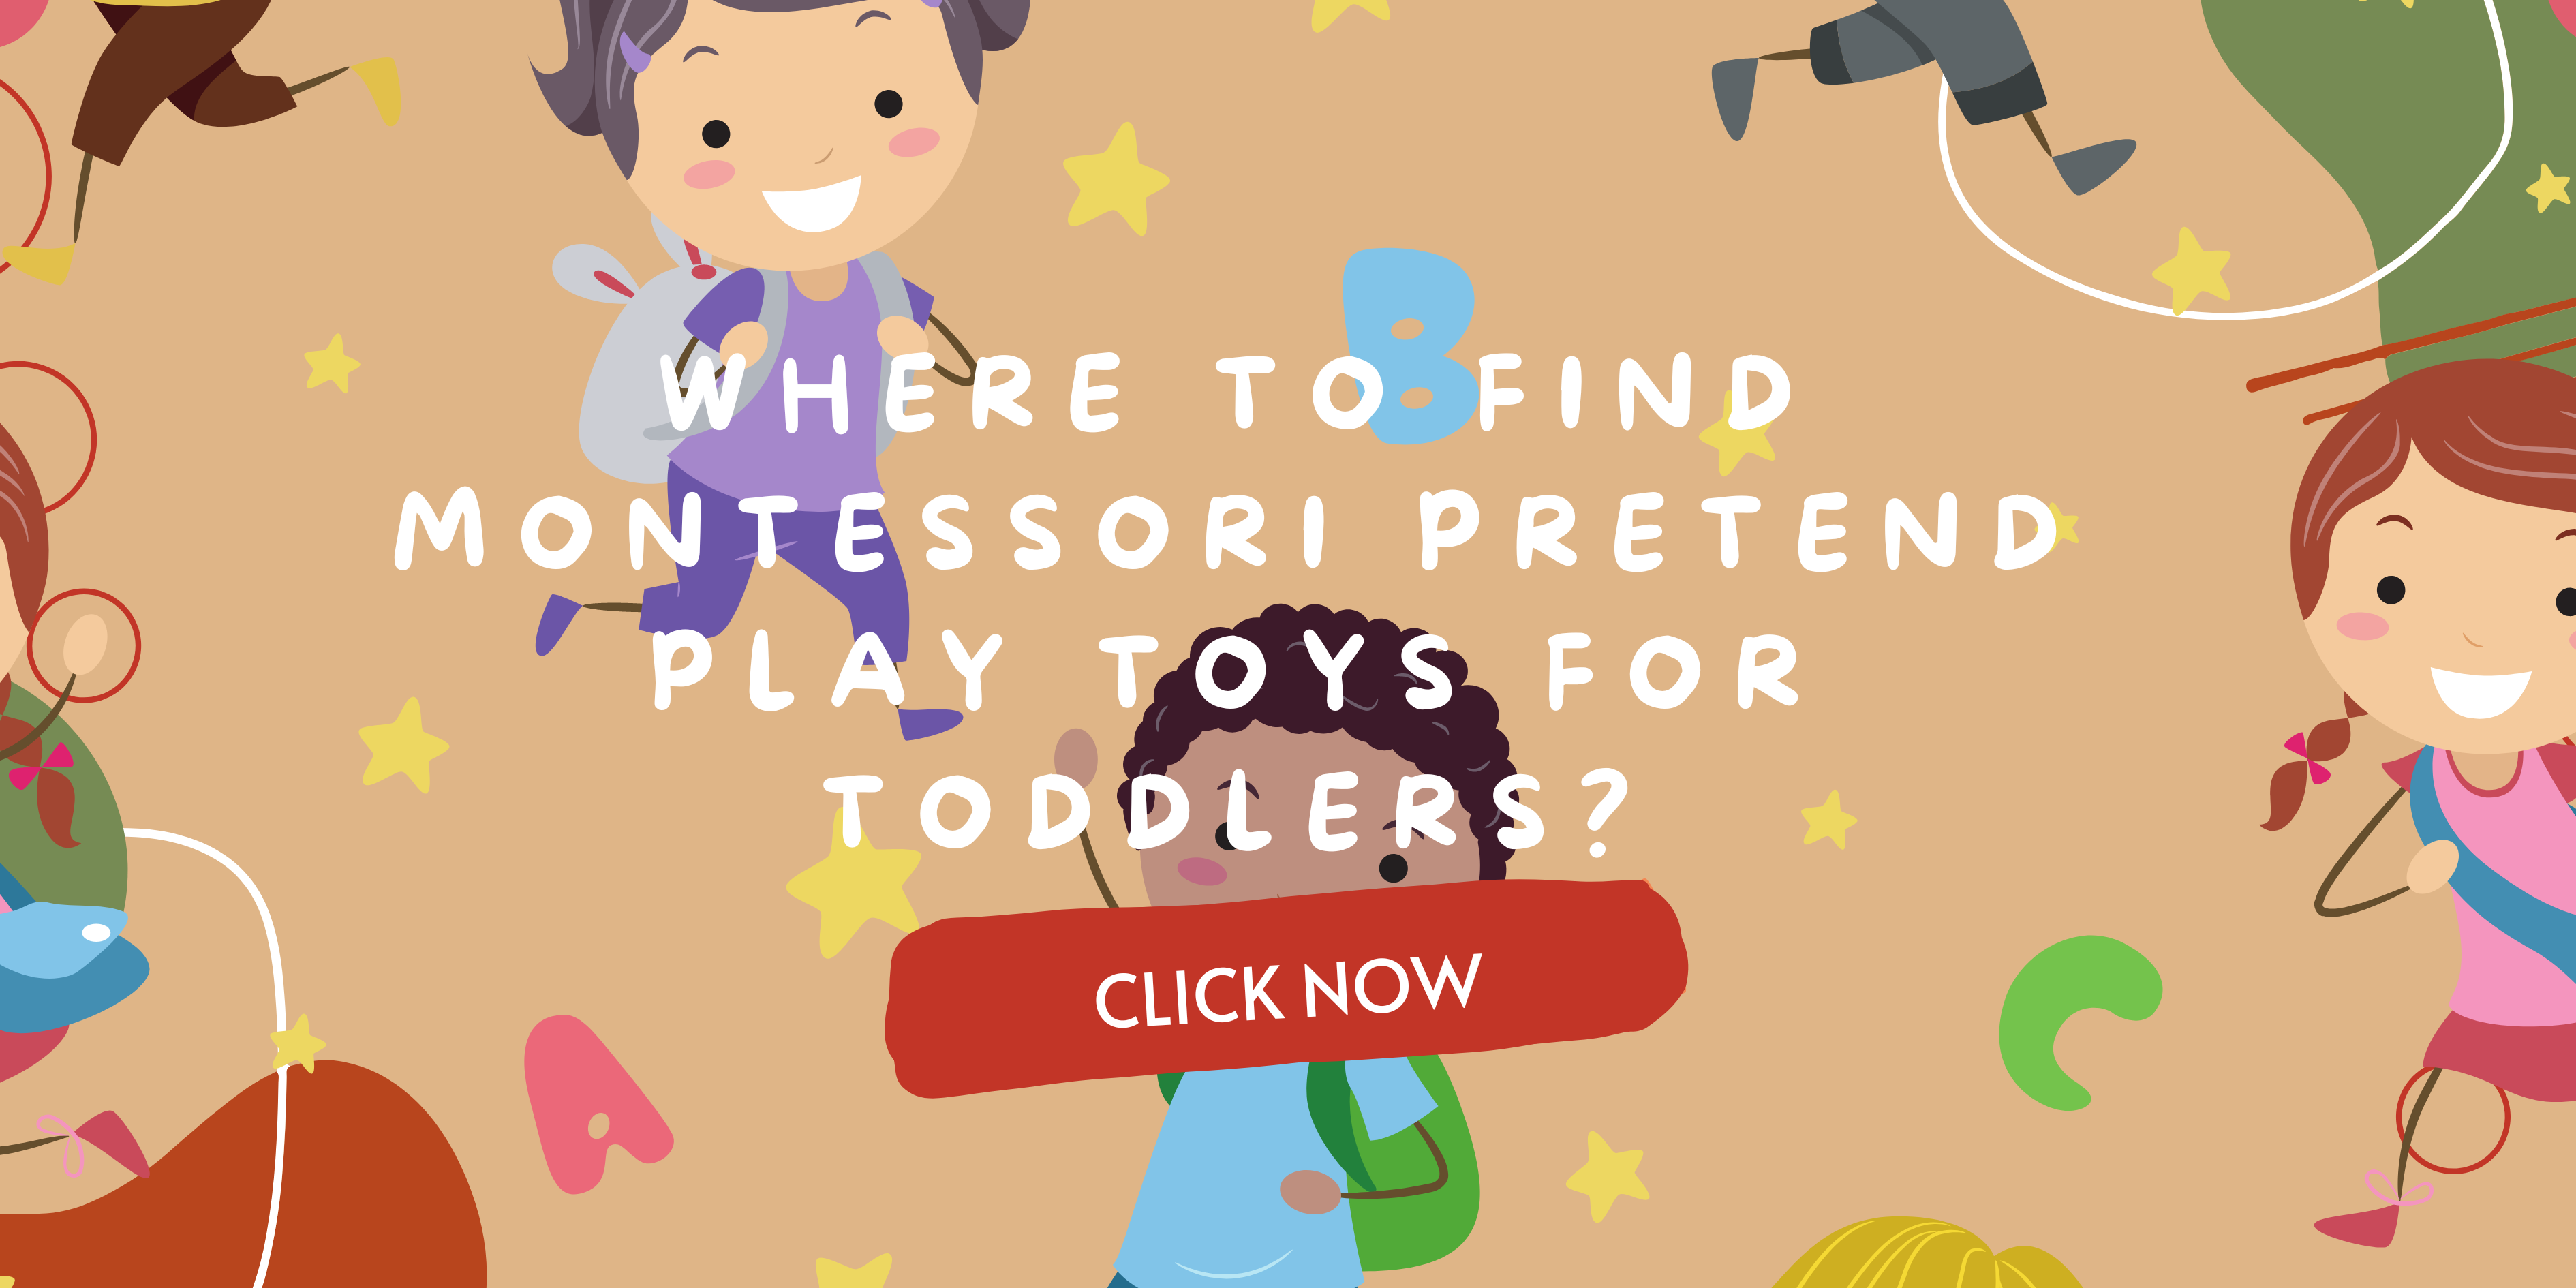 Where to Find Montessori Pretend Play Toys for Toddlers?